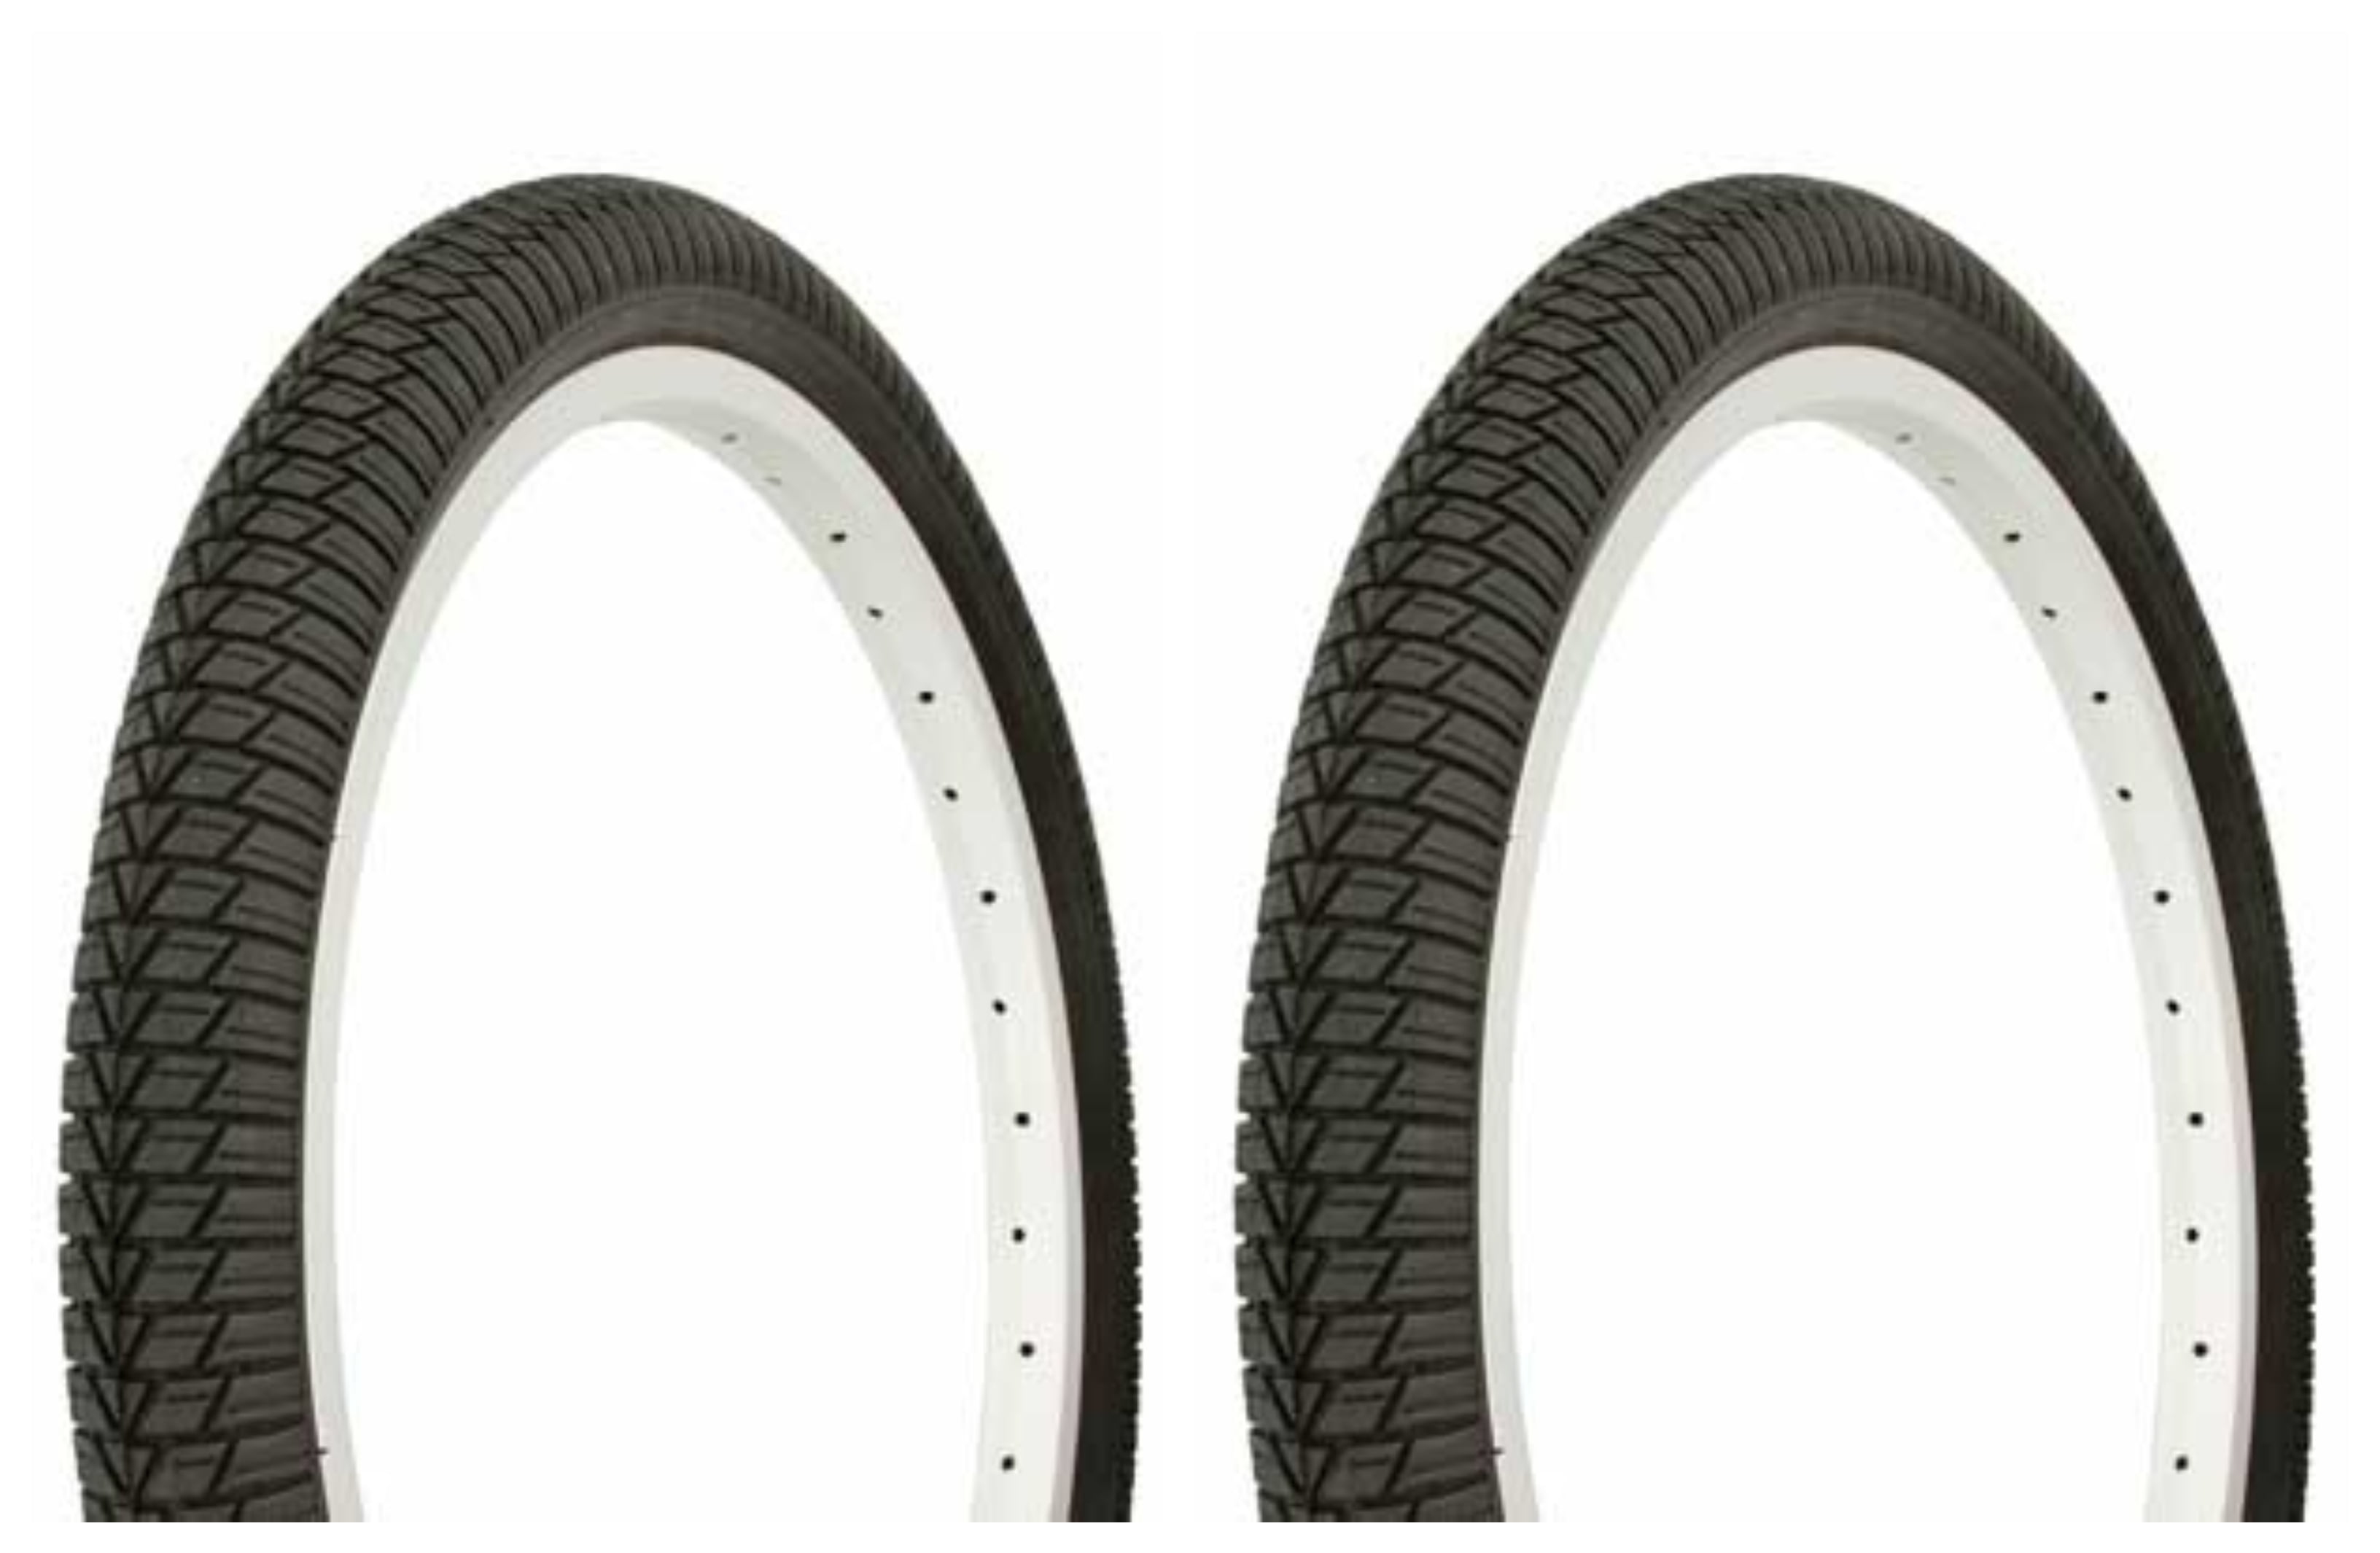 x 1.75-2.25 In. Black Bell Air Guard Freestyle BMX Bike Tire 7115510 for sale online 20 In 